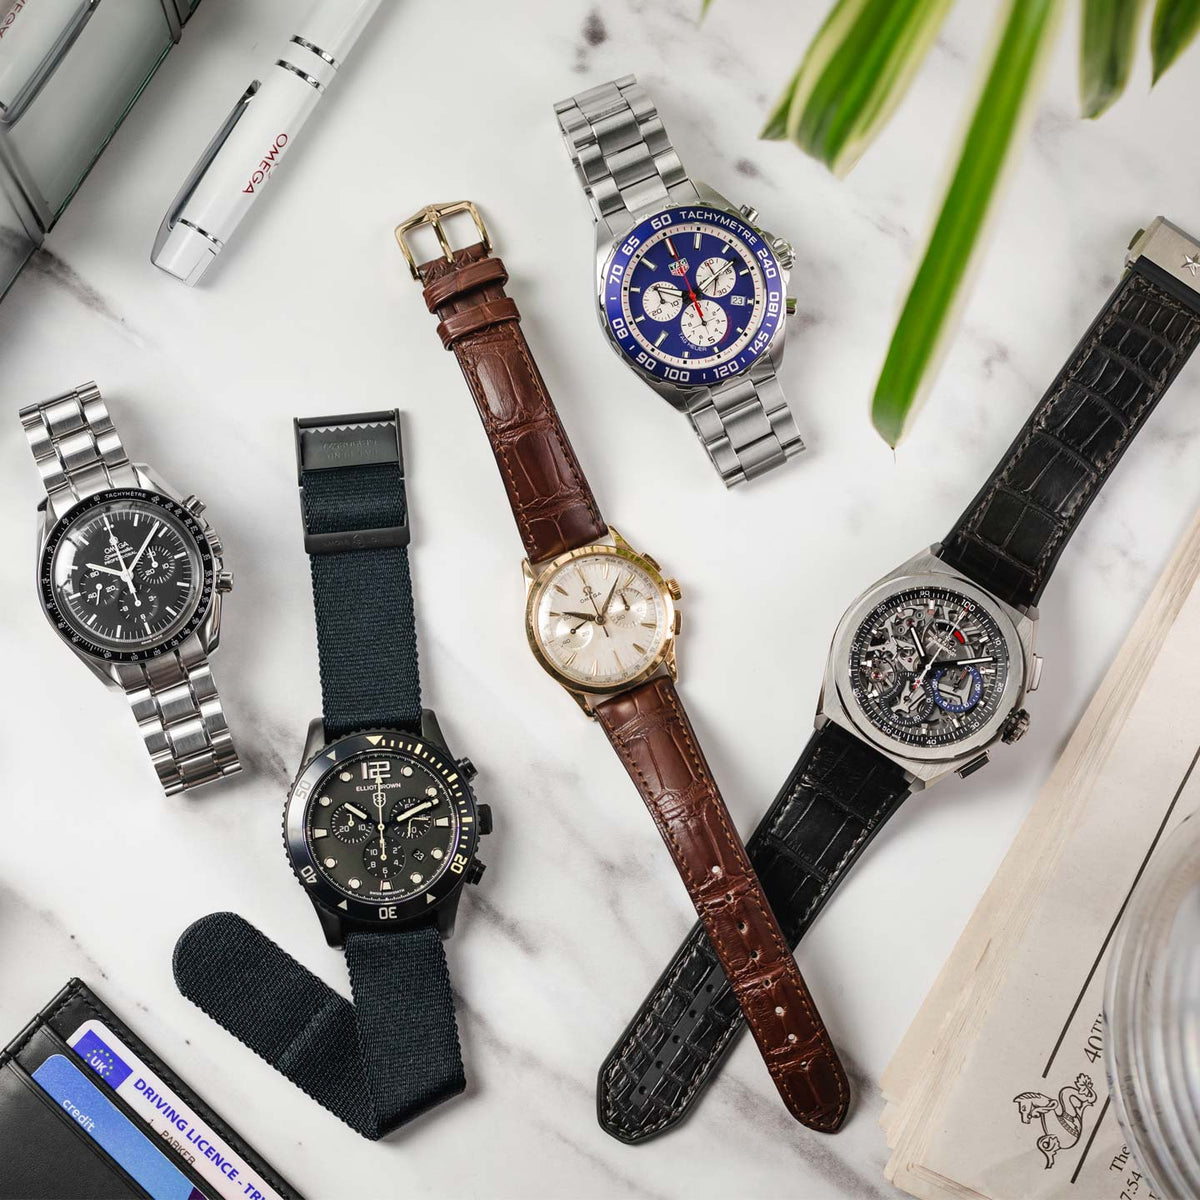 what does a chronograph watch do?